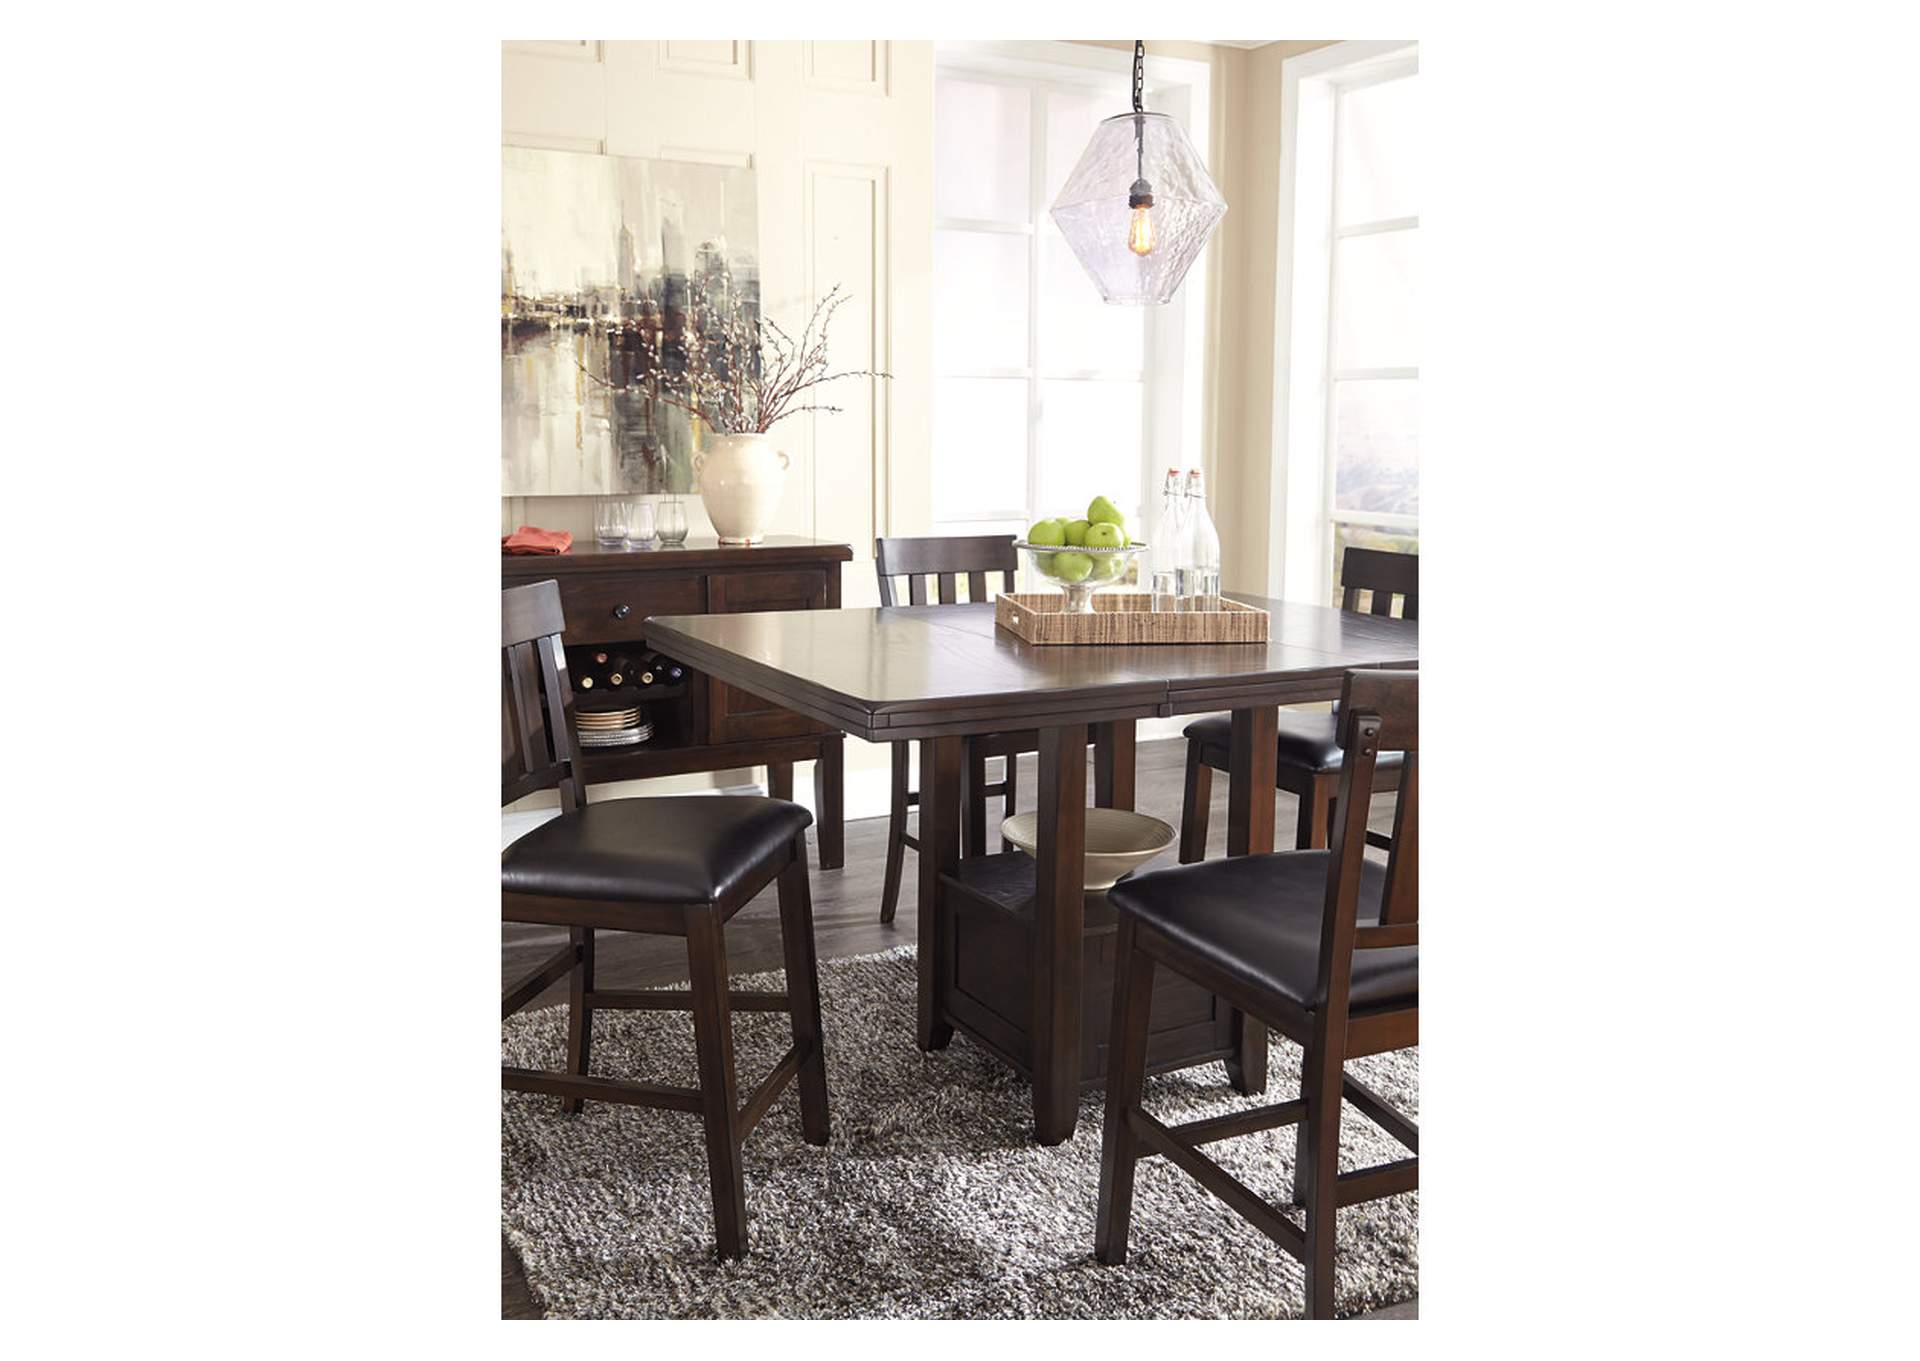 Haddigan Counter Height Dining Room Extension Table,Direct To Consumer Express